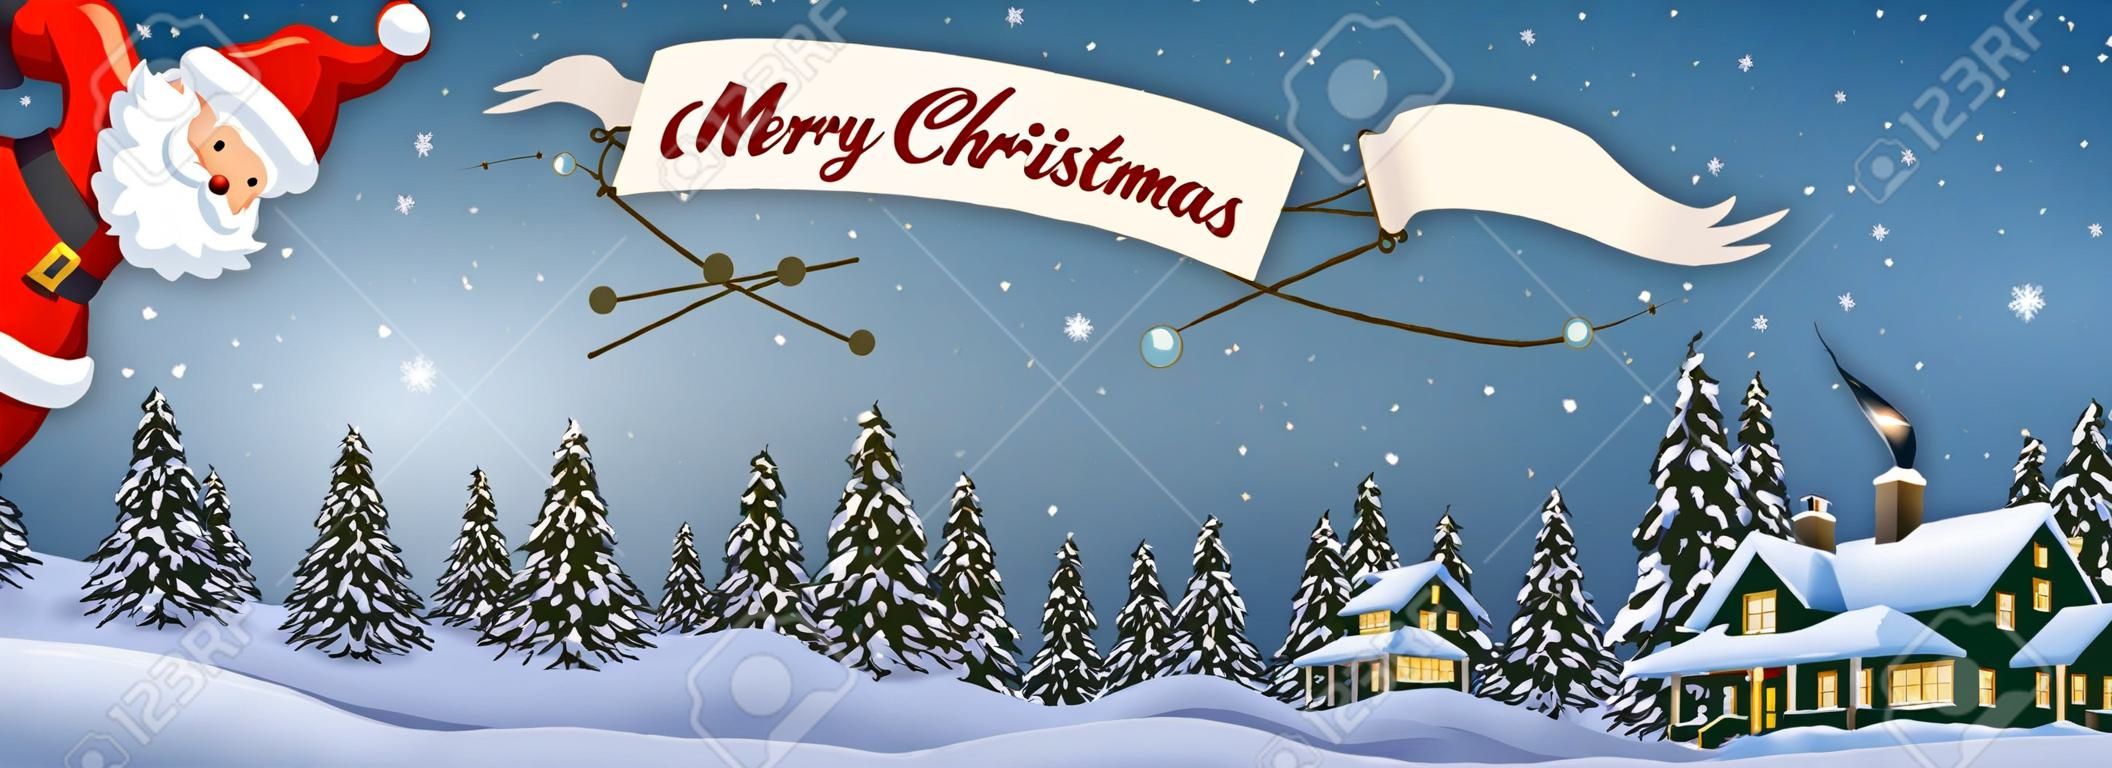 Santa claus cartoon flying on airplane with merry christmas message banner at night over xmas snowy landscape